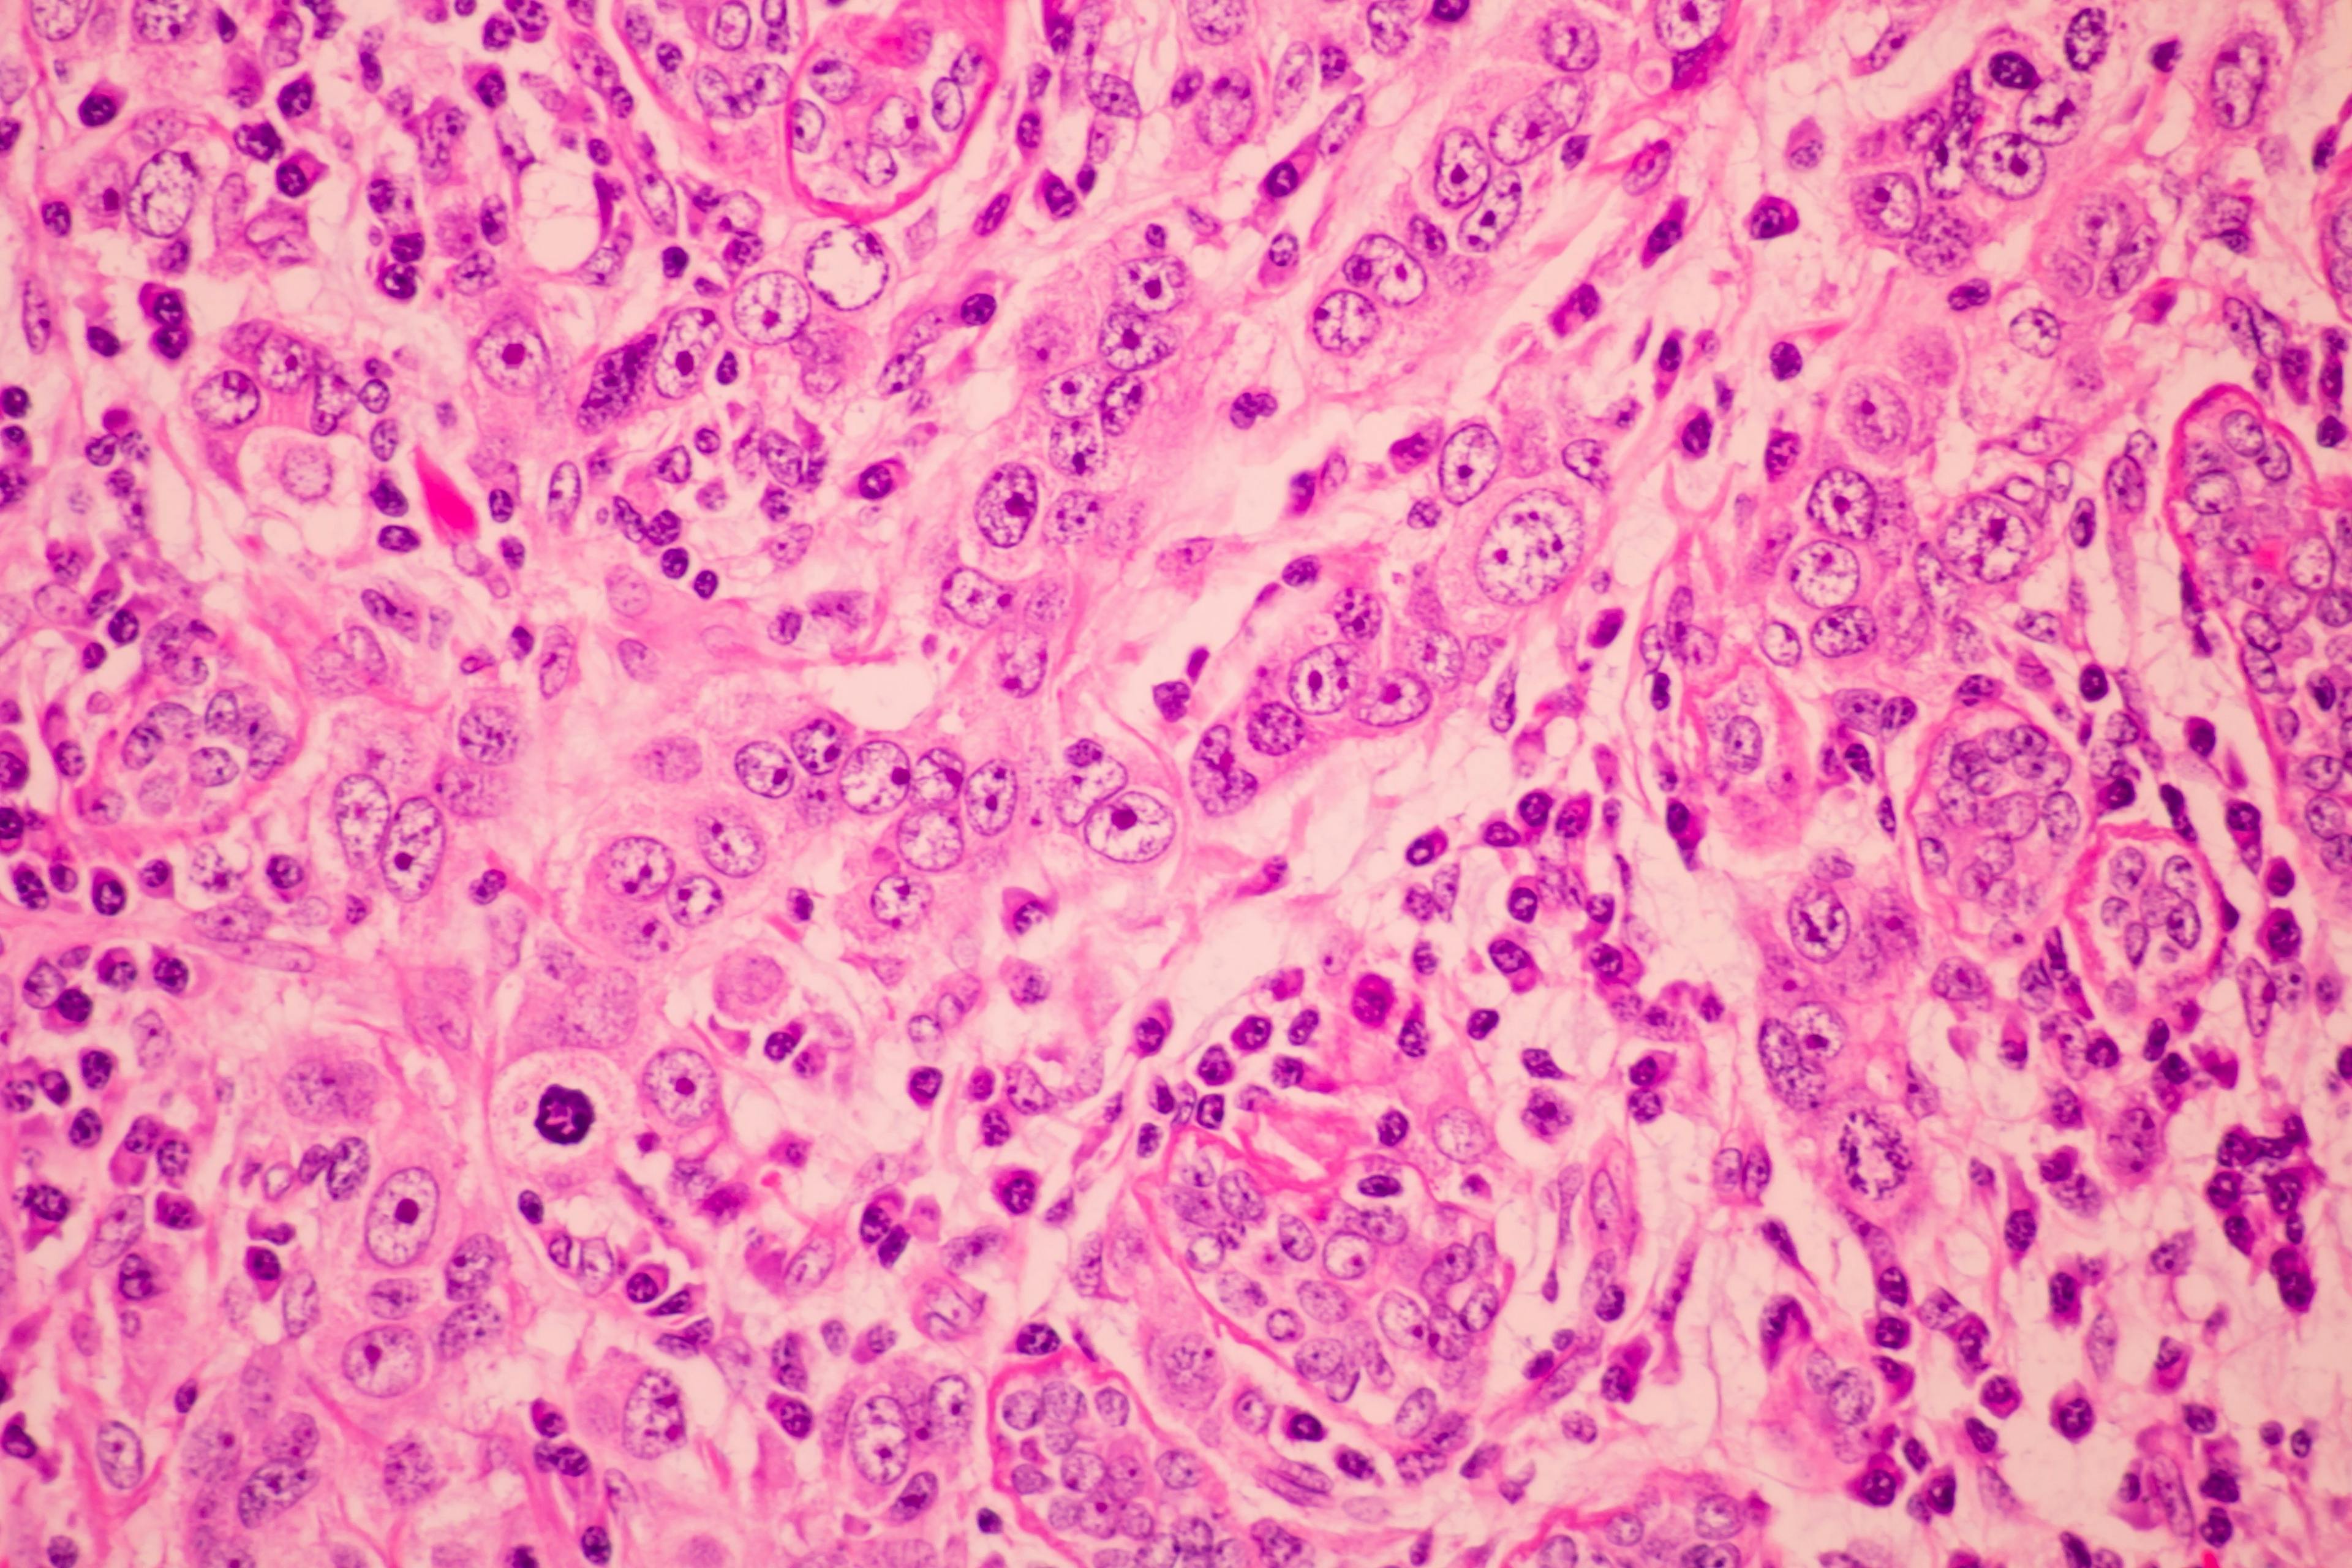 View in microscopic of pathology cross section tissue ductal cell carcinoma or adenocarcinoma diagnosis by pathologist in laboratory | Image Credit: arcyto - stock.adobe.com